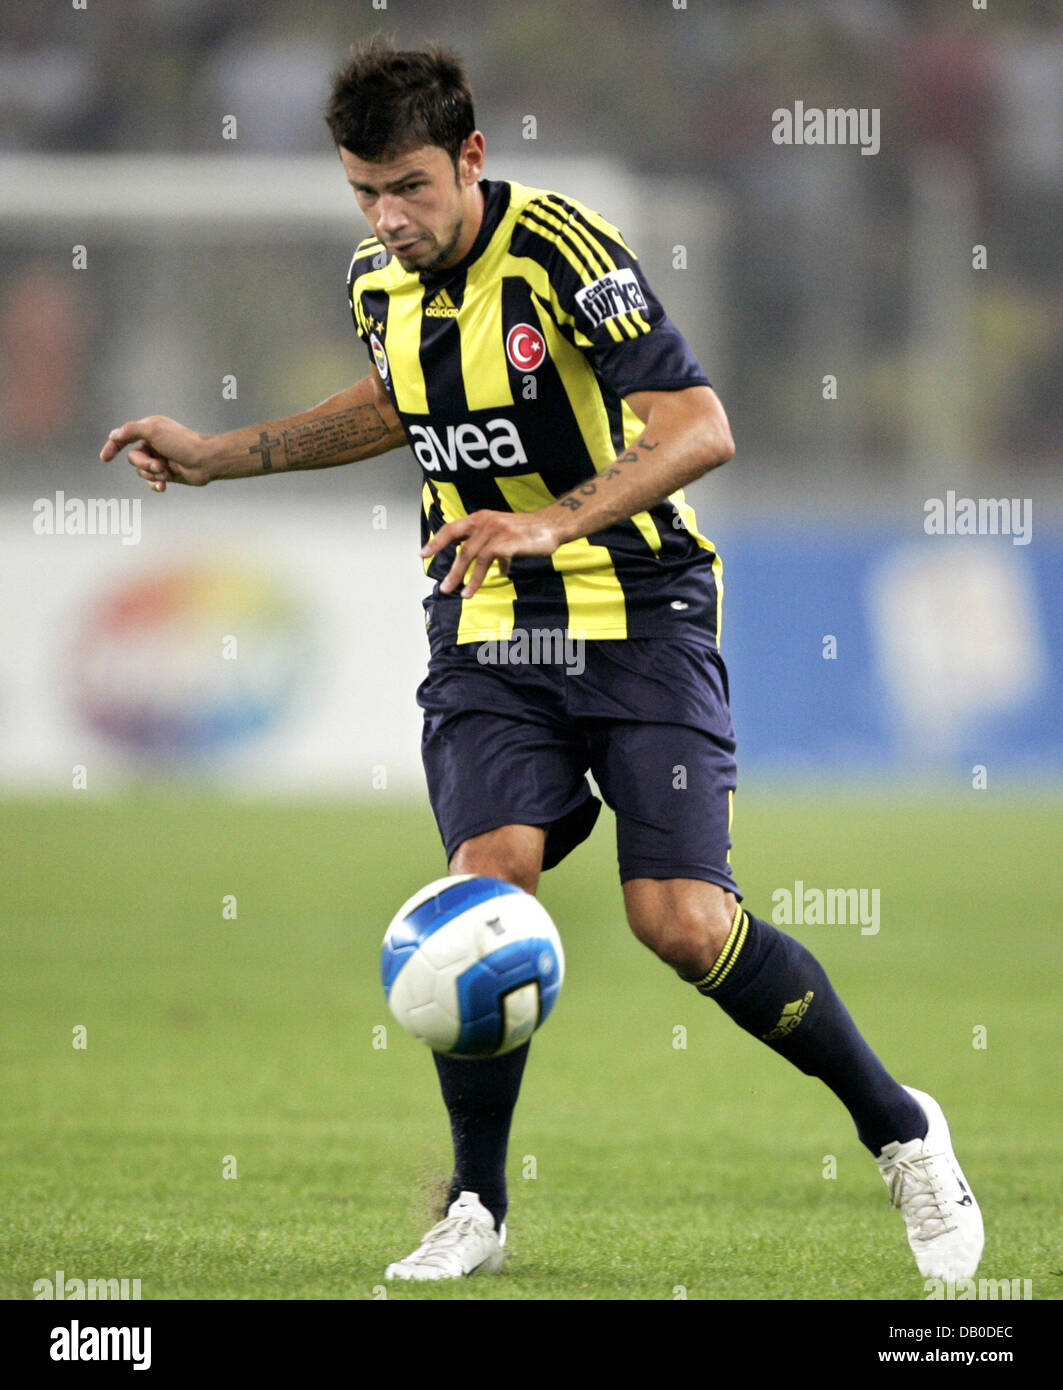 Mateja Kezman of Fenerbahce controls the ball during the TTF Super Cup finals Fenerbahce v Besiktas at RheinEnergie stadium of Cologne, Germany, 05 August 2007. Photo: Roland Weihrauch Stock Photo